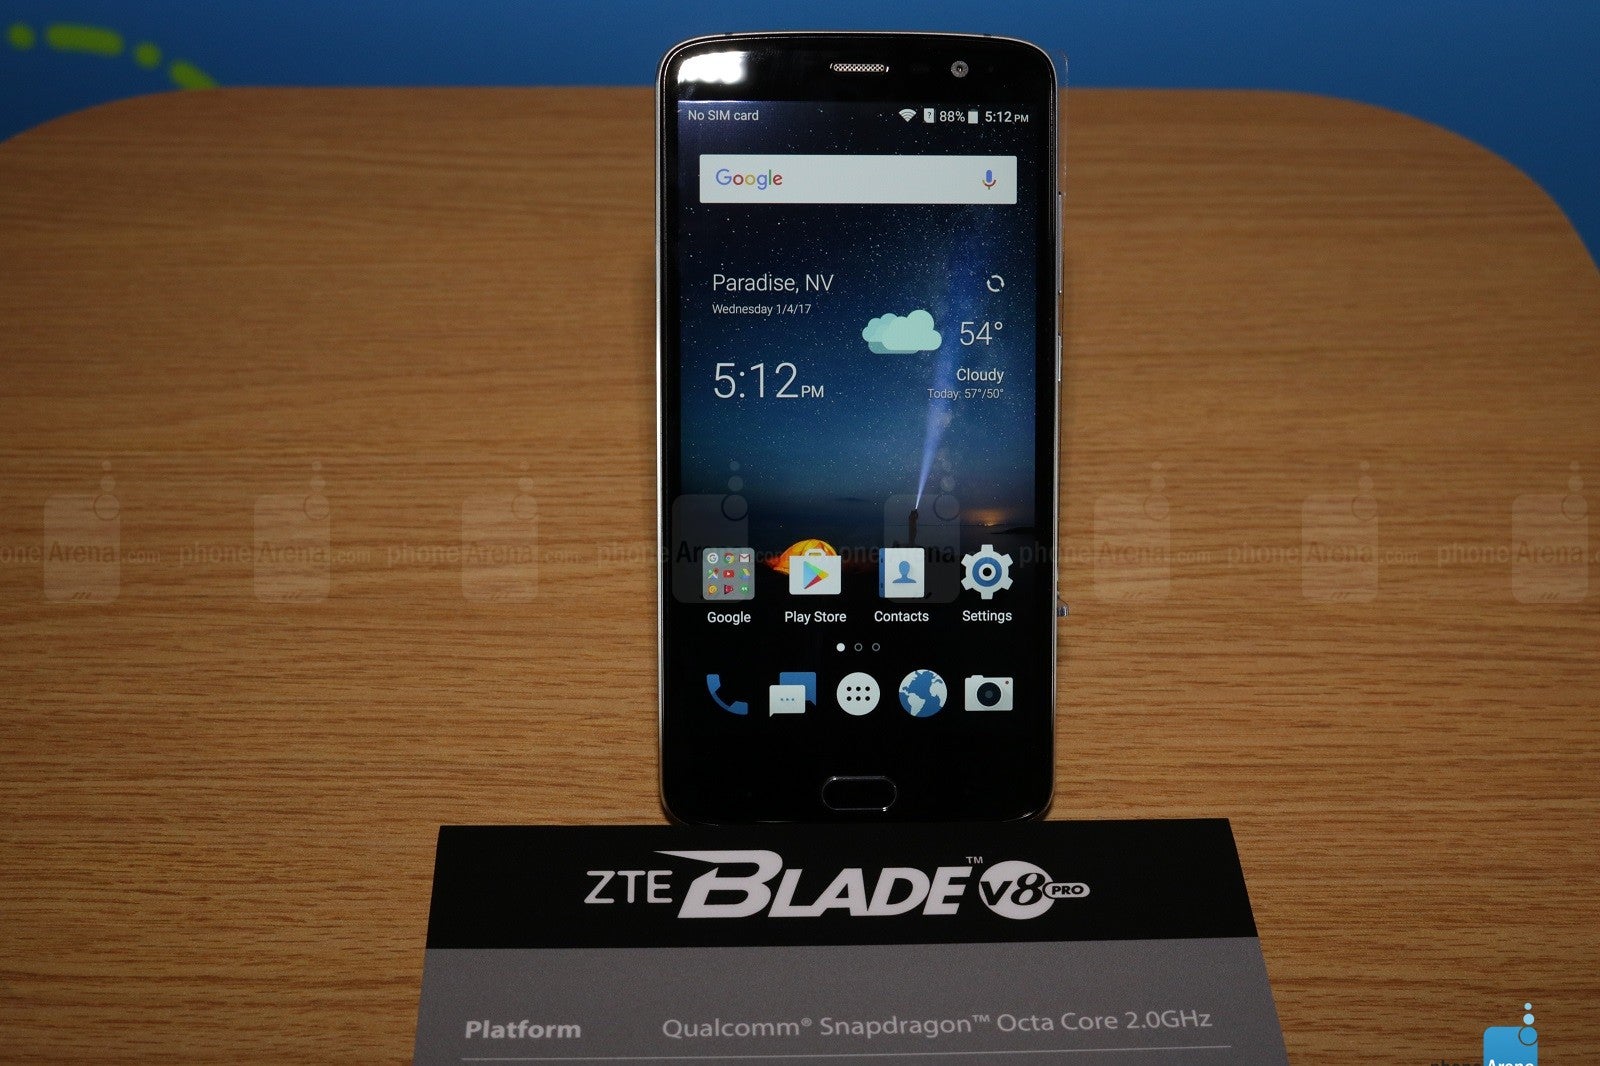 Hands on with the ZTE Blade V8 Pro - another budget, dual-camera smartphone